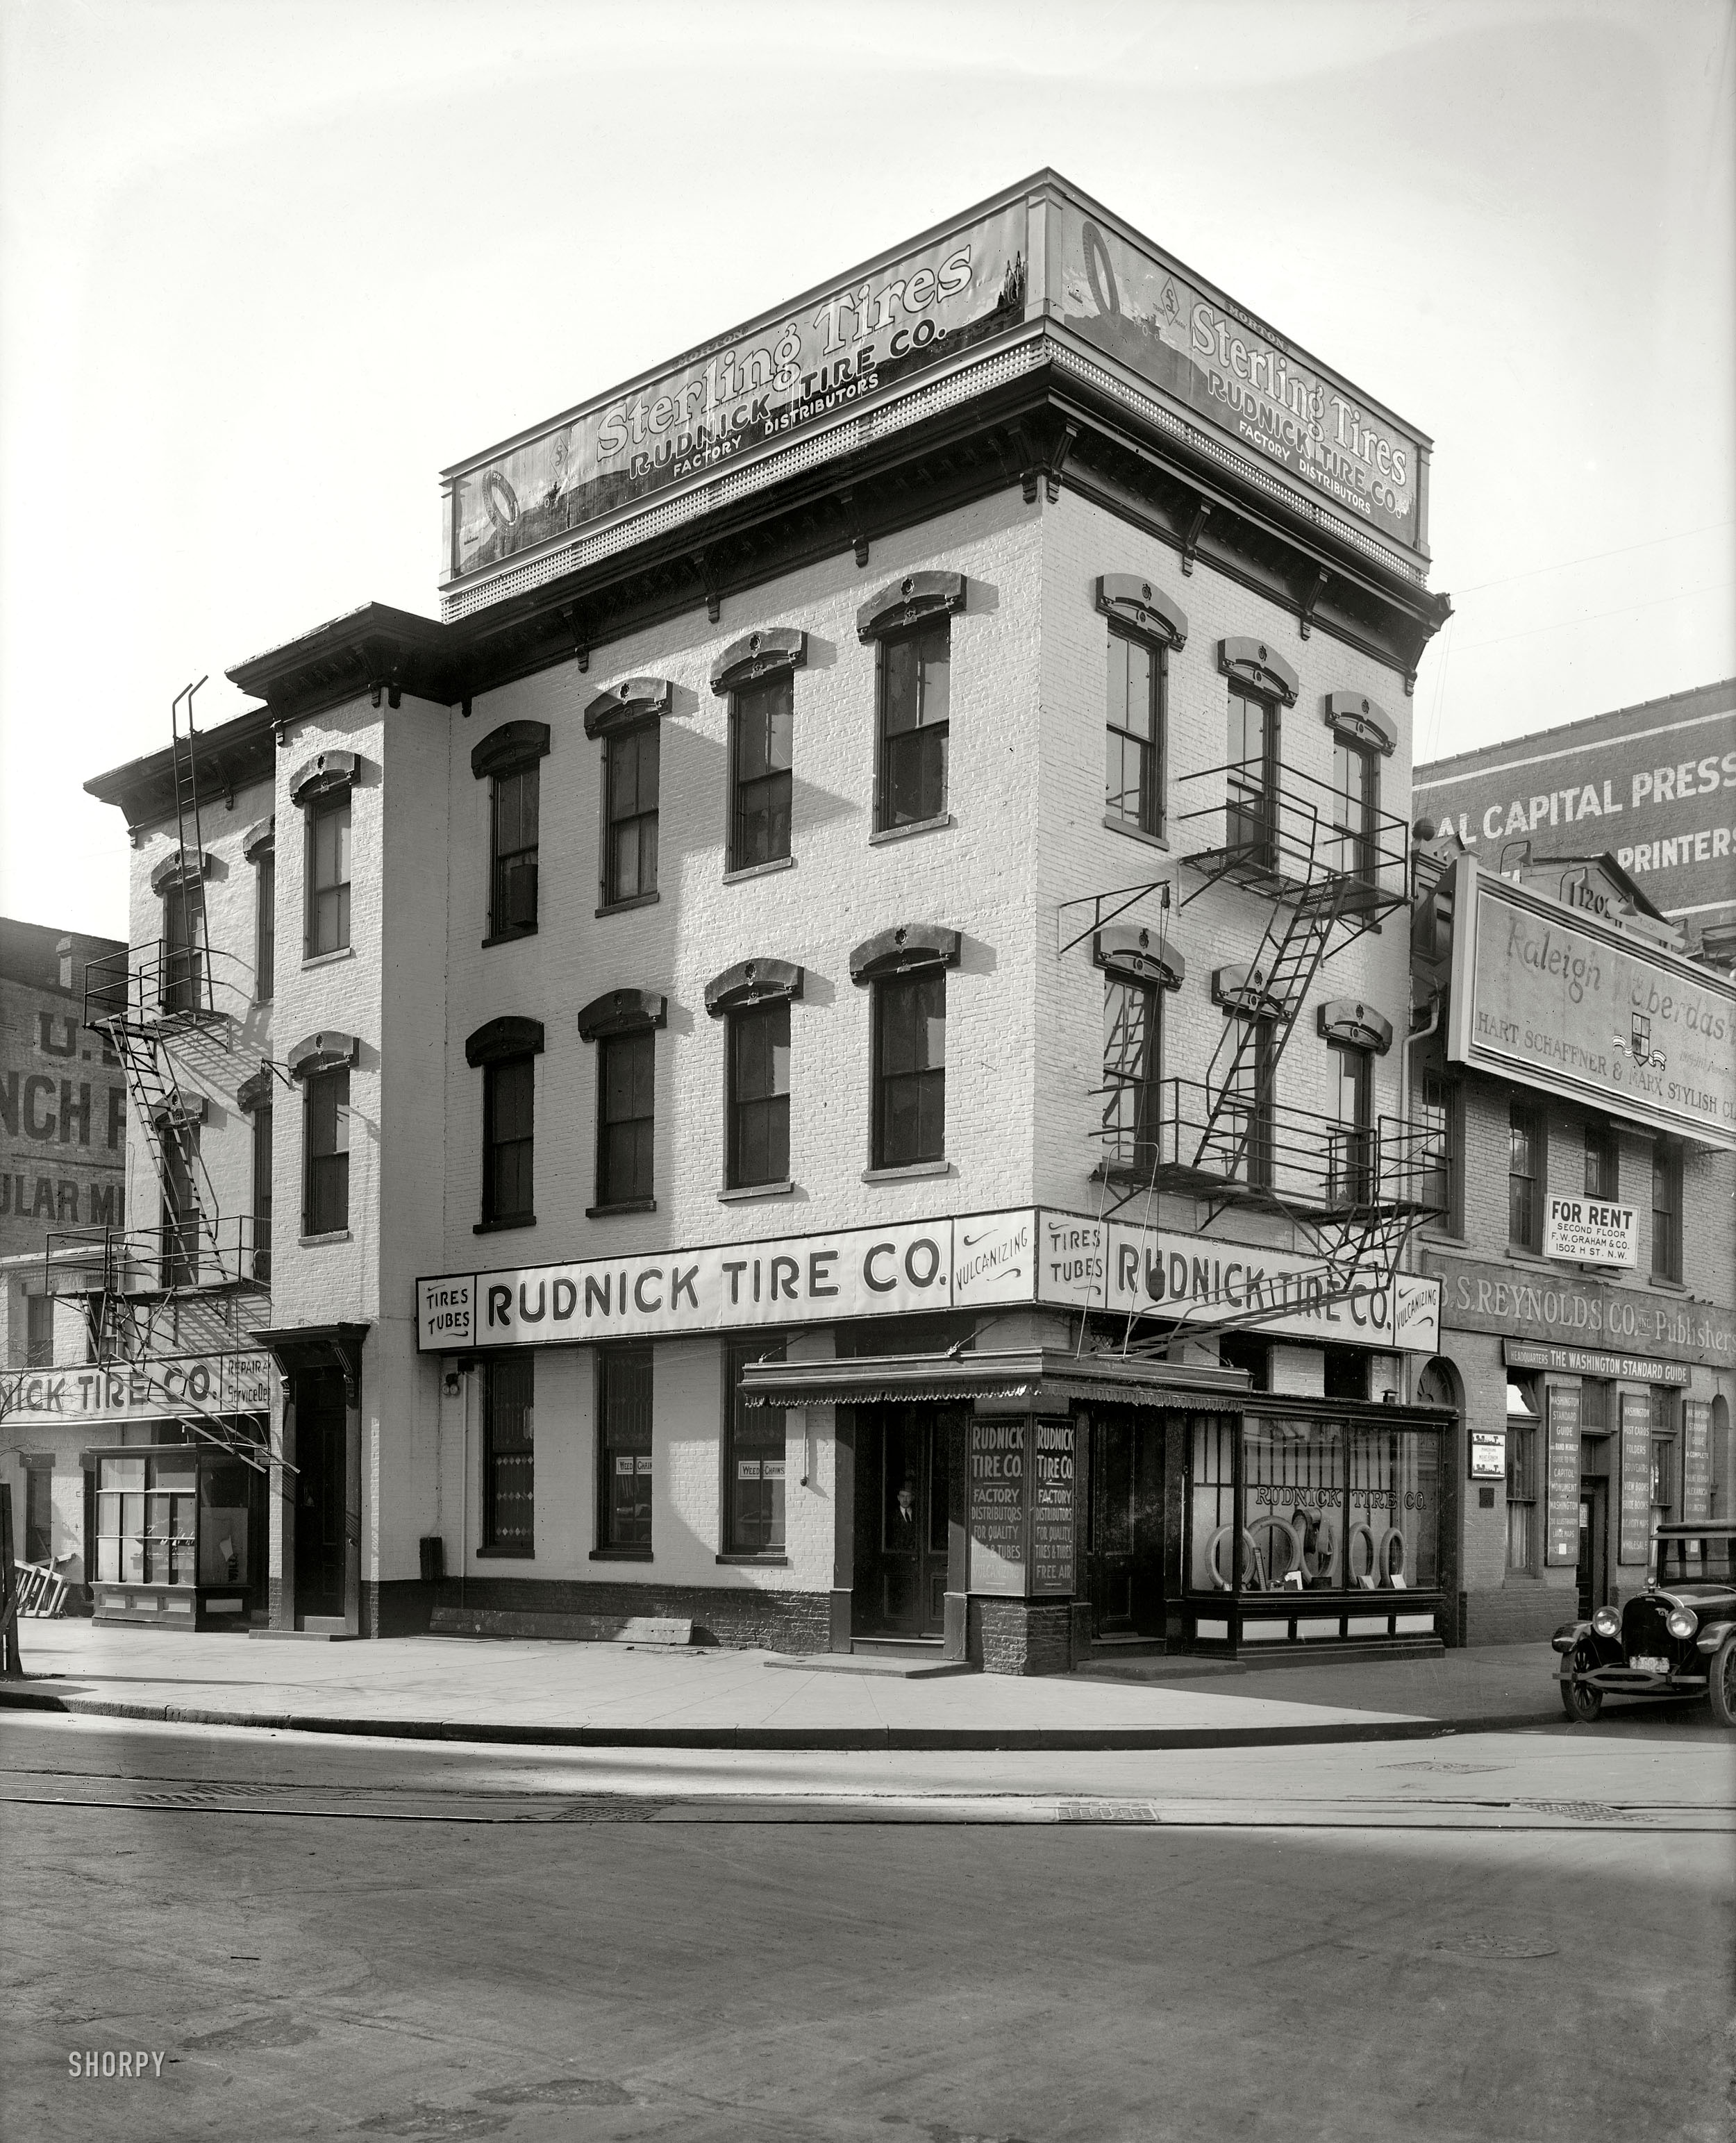 Washington, D.C., circa 1921. "Rudnick Tire Co., front." With perhaps Rudnick himself. National Photo Company Collection glass negative. View full size.